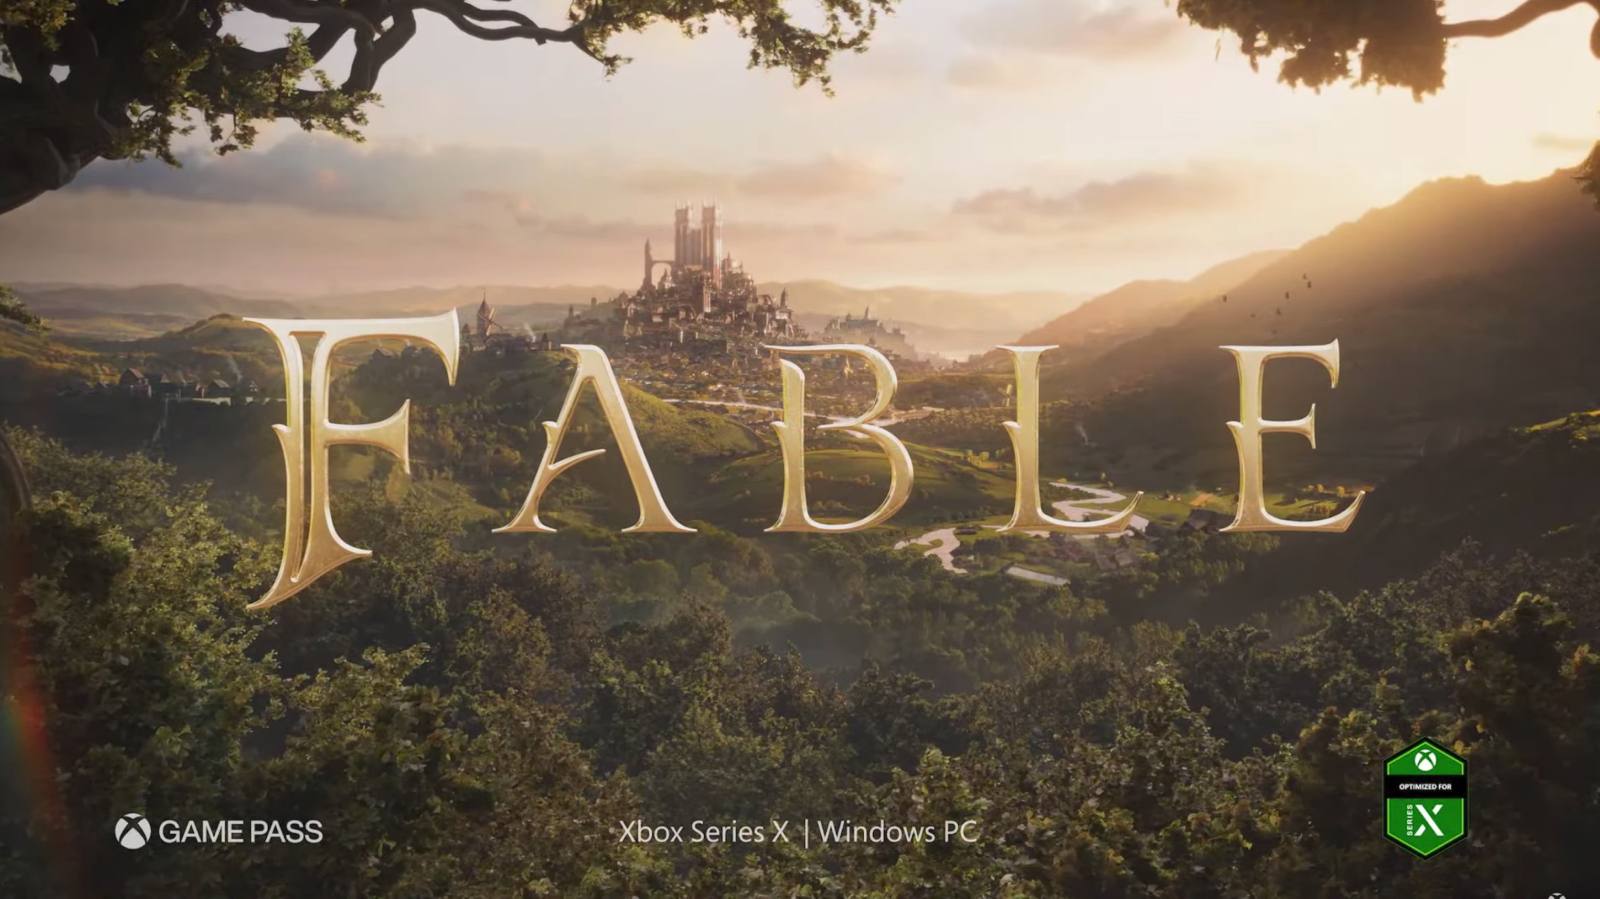 Upcoming Fable game cover fable 4